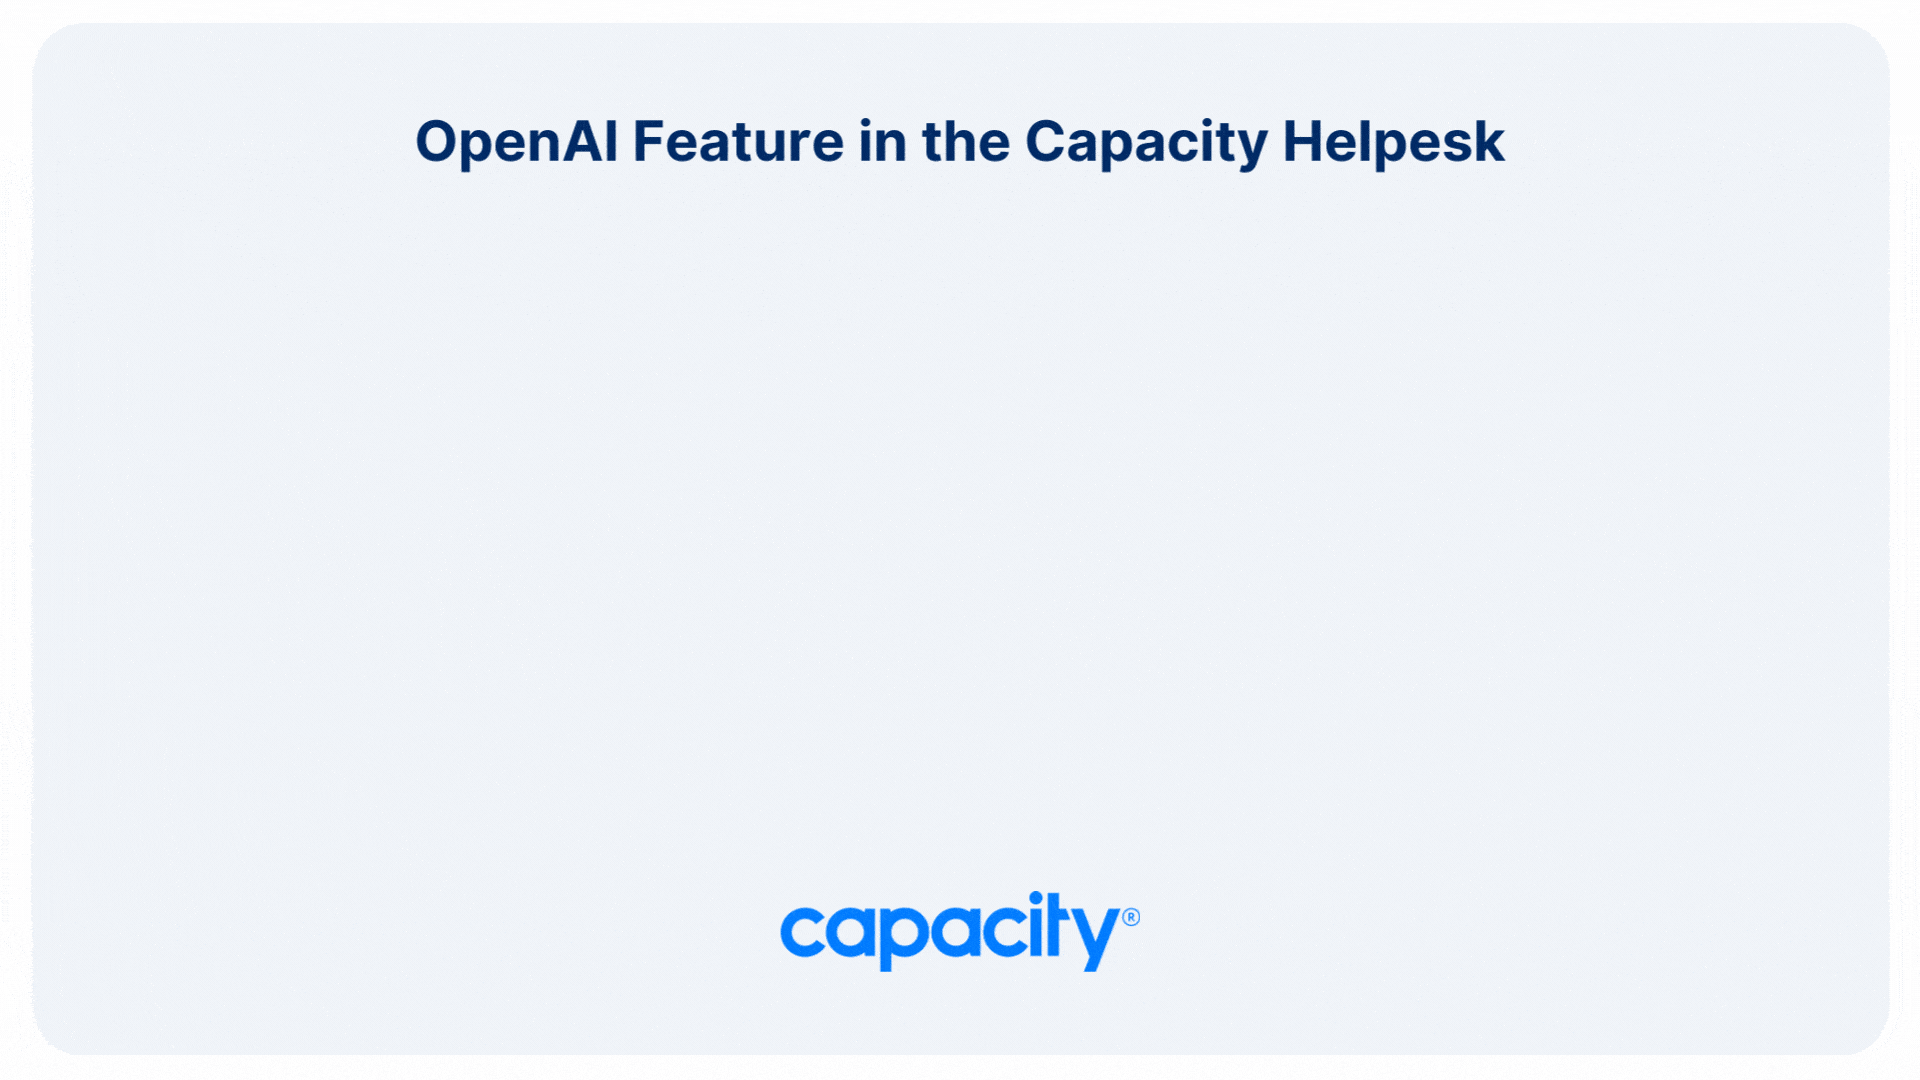 Graphic showing OpenAI in Capacity's Helpdesk.